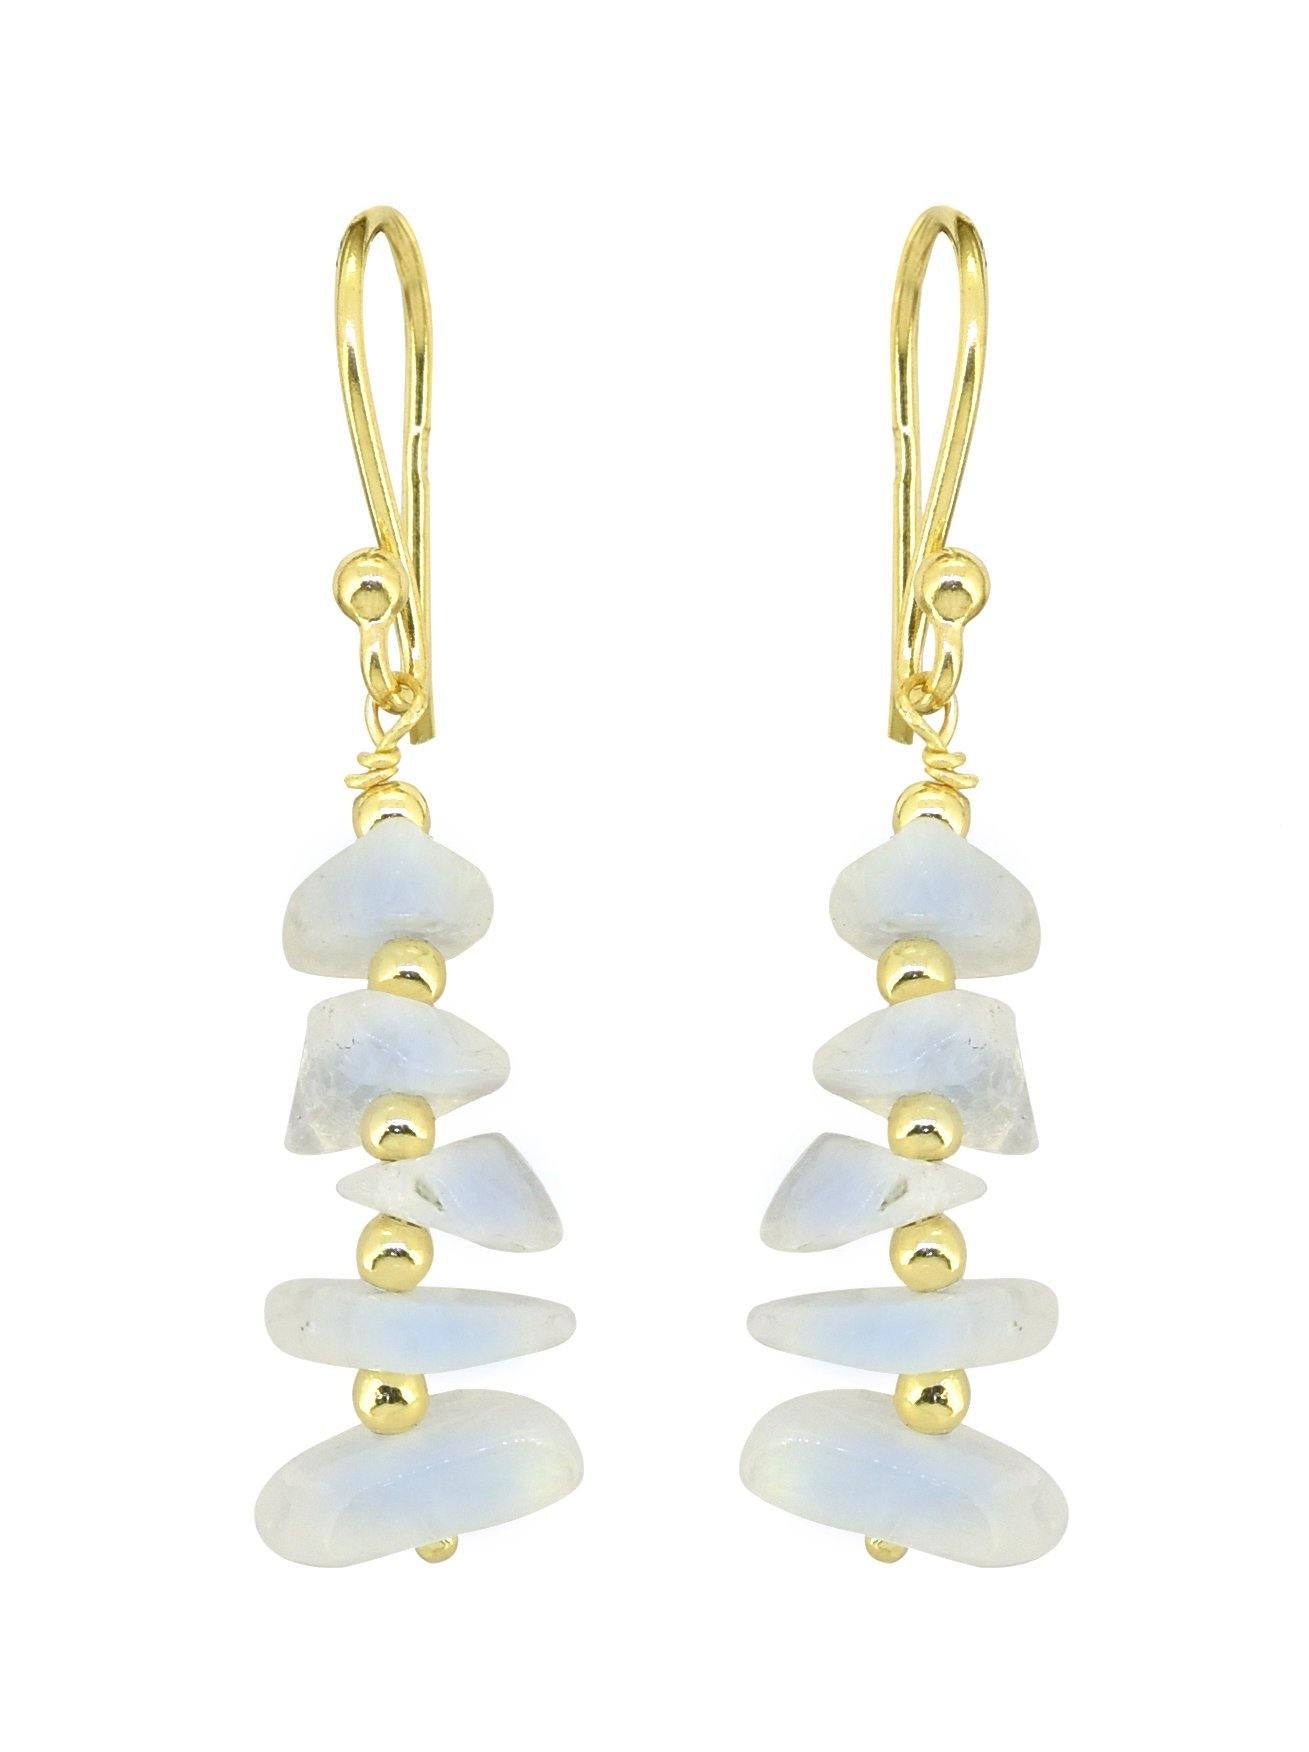 Moonstone Solid 925 Silver Gold Plated Dangle Earrings Jewelry - YoTreasure